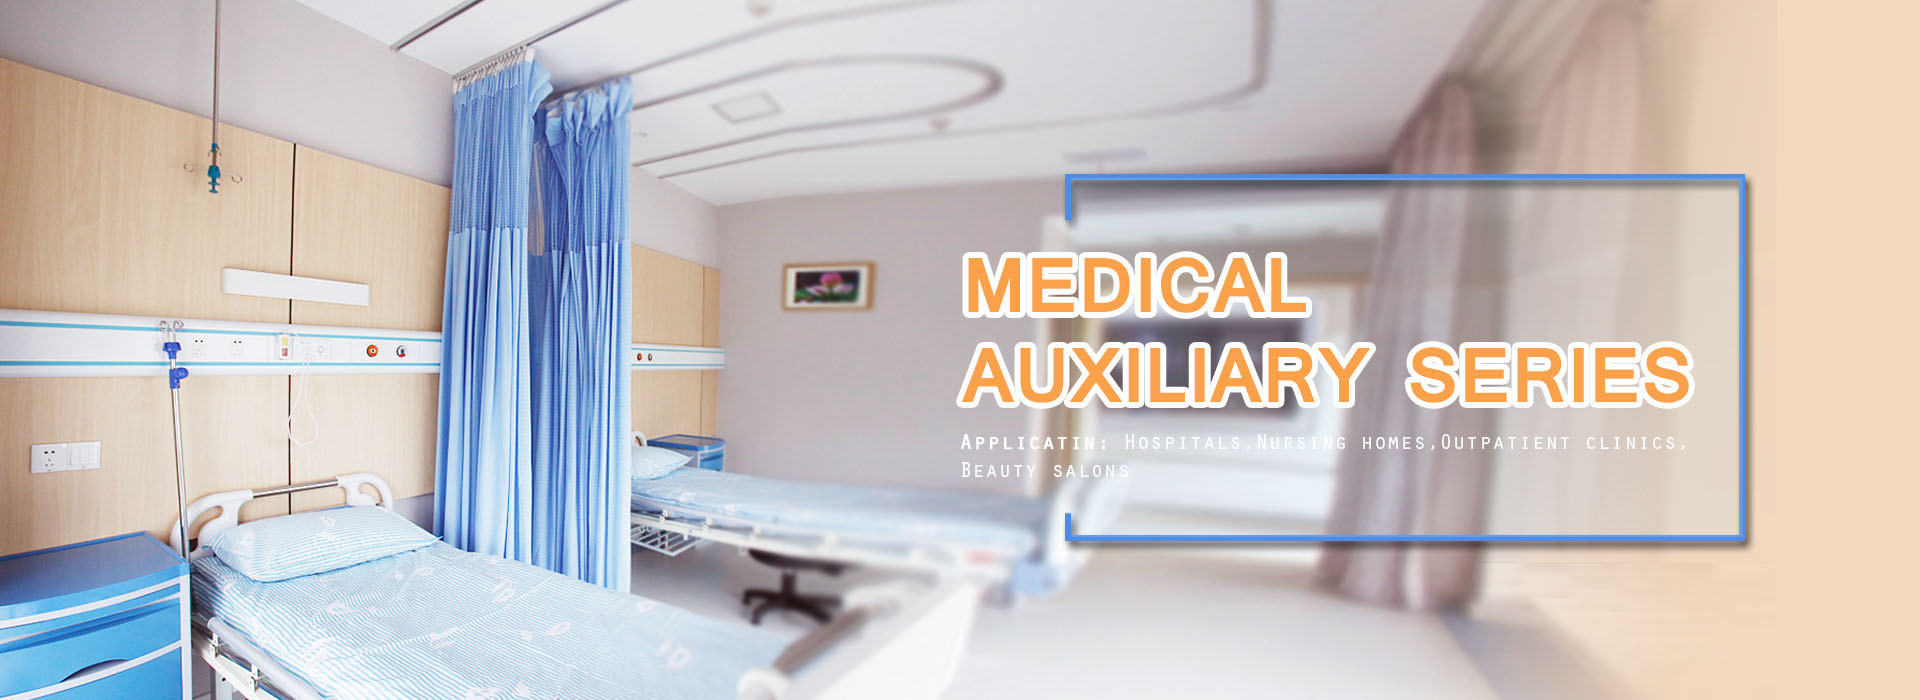 MEDICAL AUXILIARY SERIES